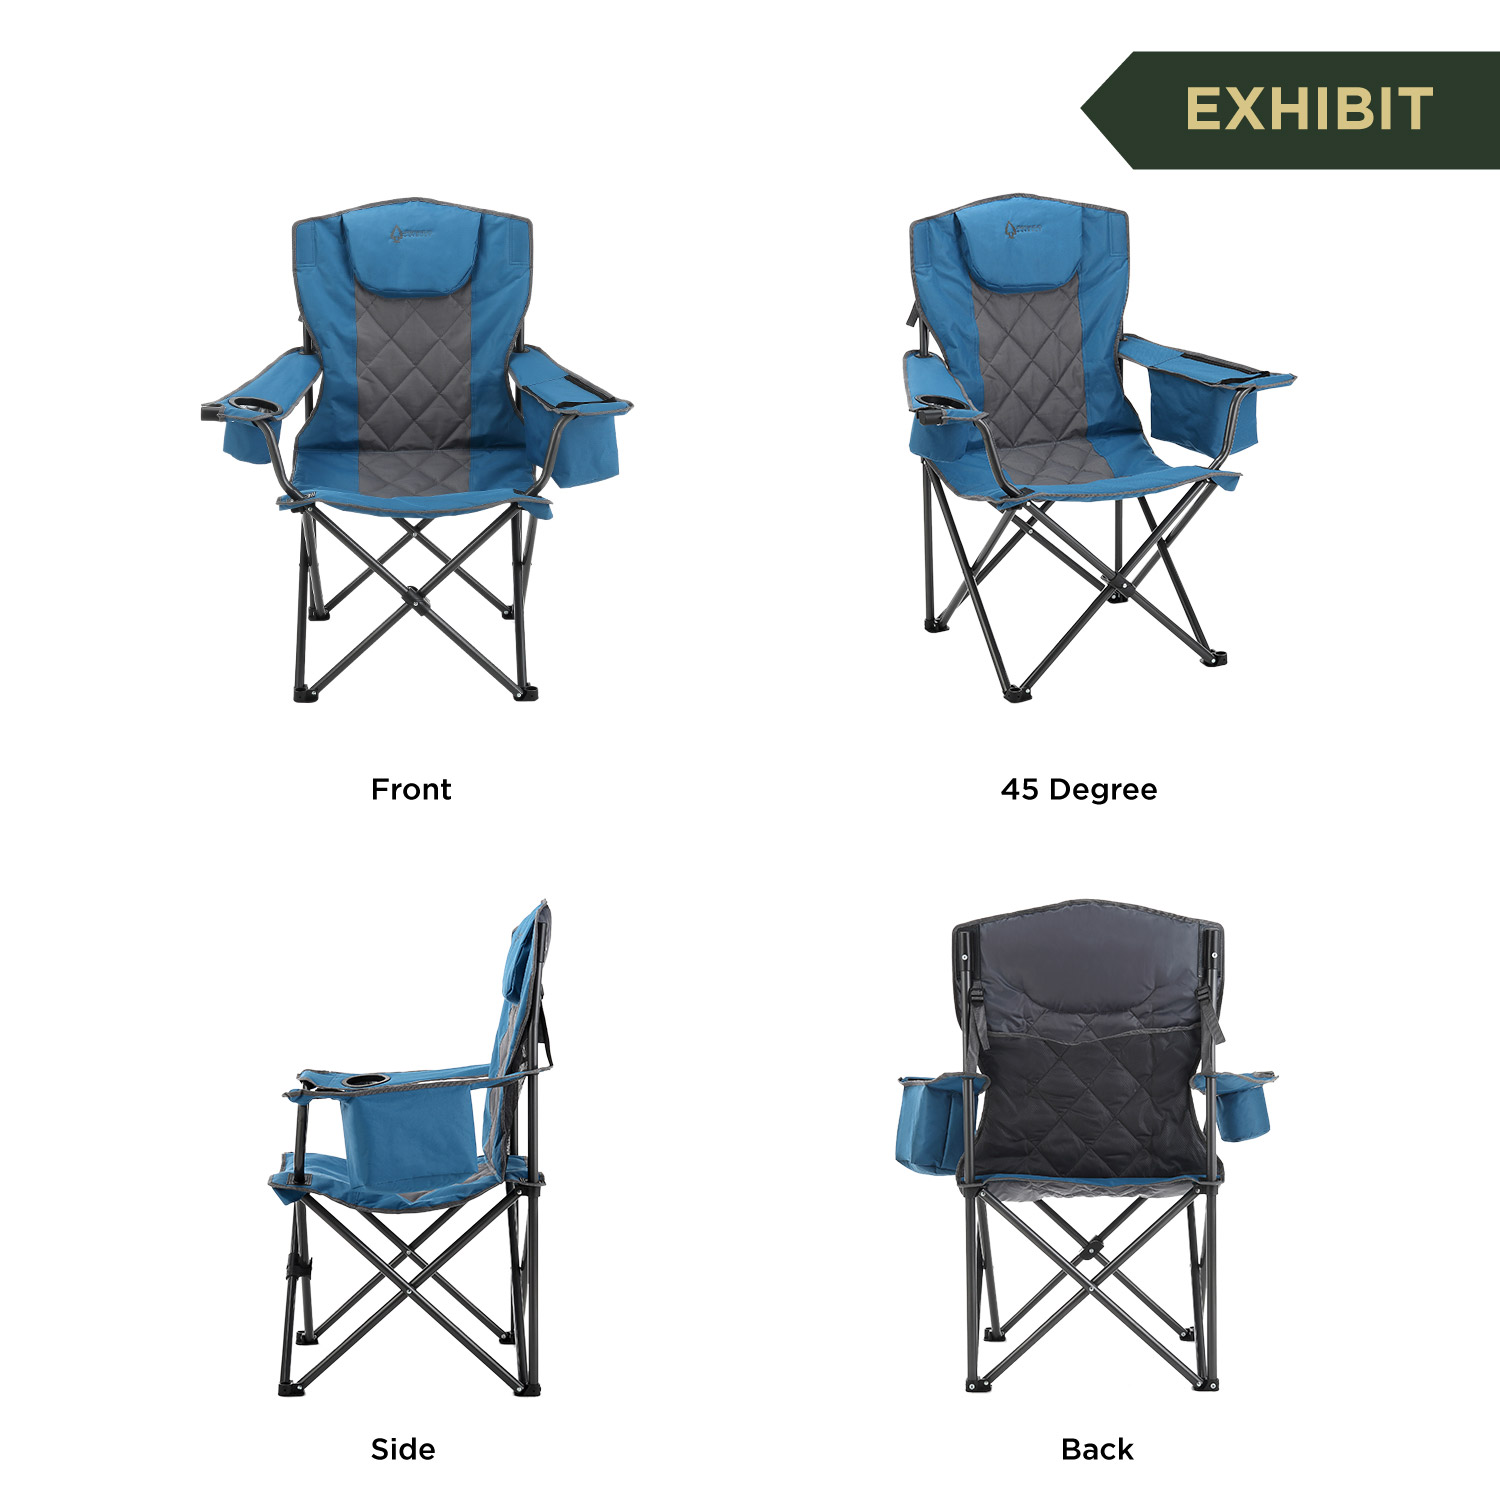 ARROWHEAD OUTDOOR Portable Folding Camping Quad Chair w/ 6-Can Cooler, Cup & Wine Glass Holders, Heavy-Duty Carrying Bag, Padded Armrests, Headrest, Supports up to 450lbs, USA-Based Support (Blue) - image 2 of 6